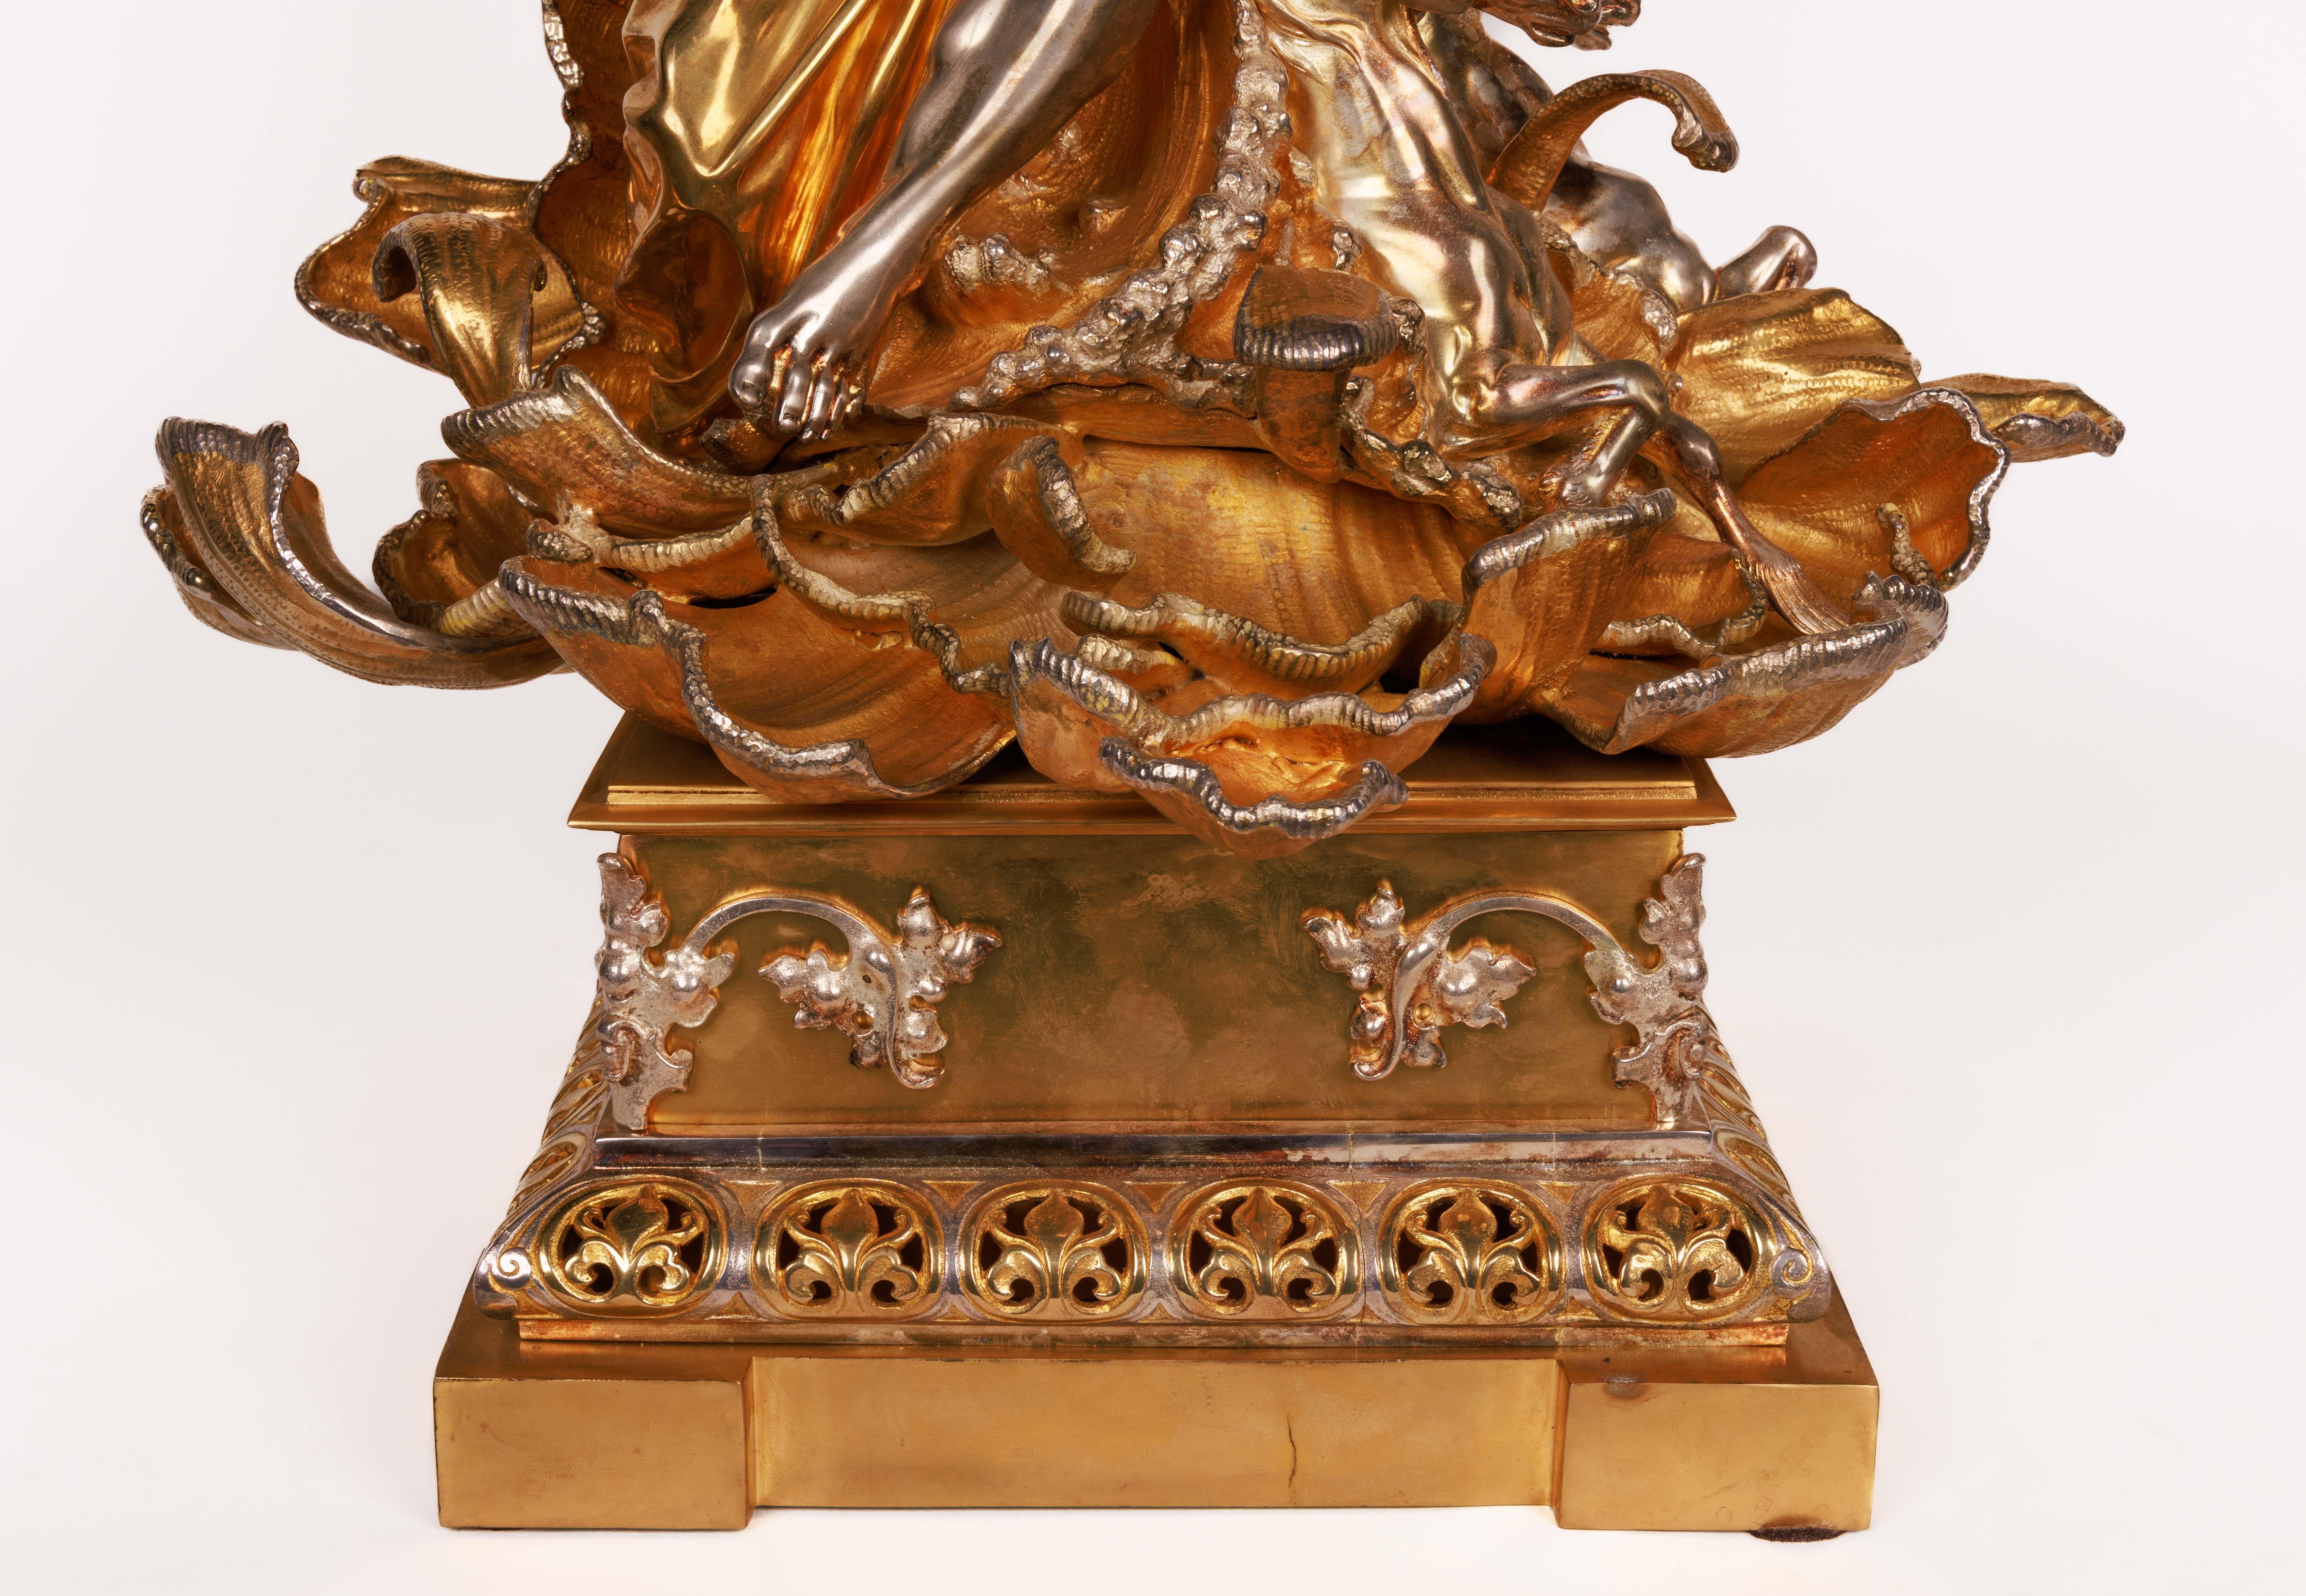 French Monumental Silvered and Gilt-Bronze Glass Centerpiece of 